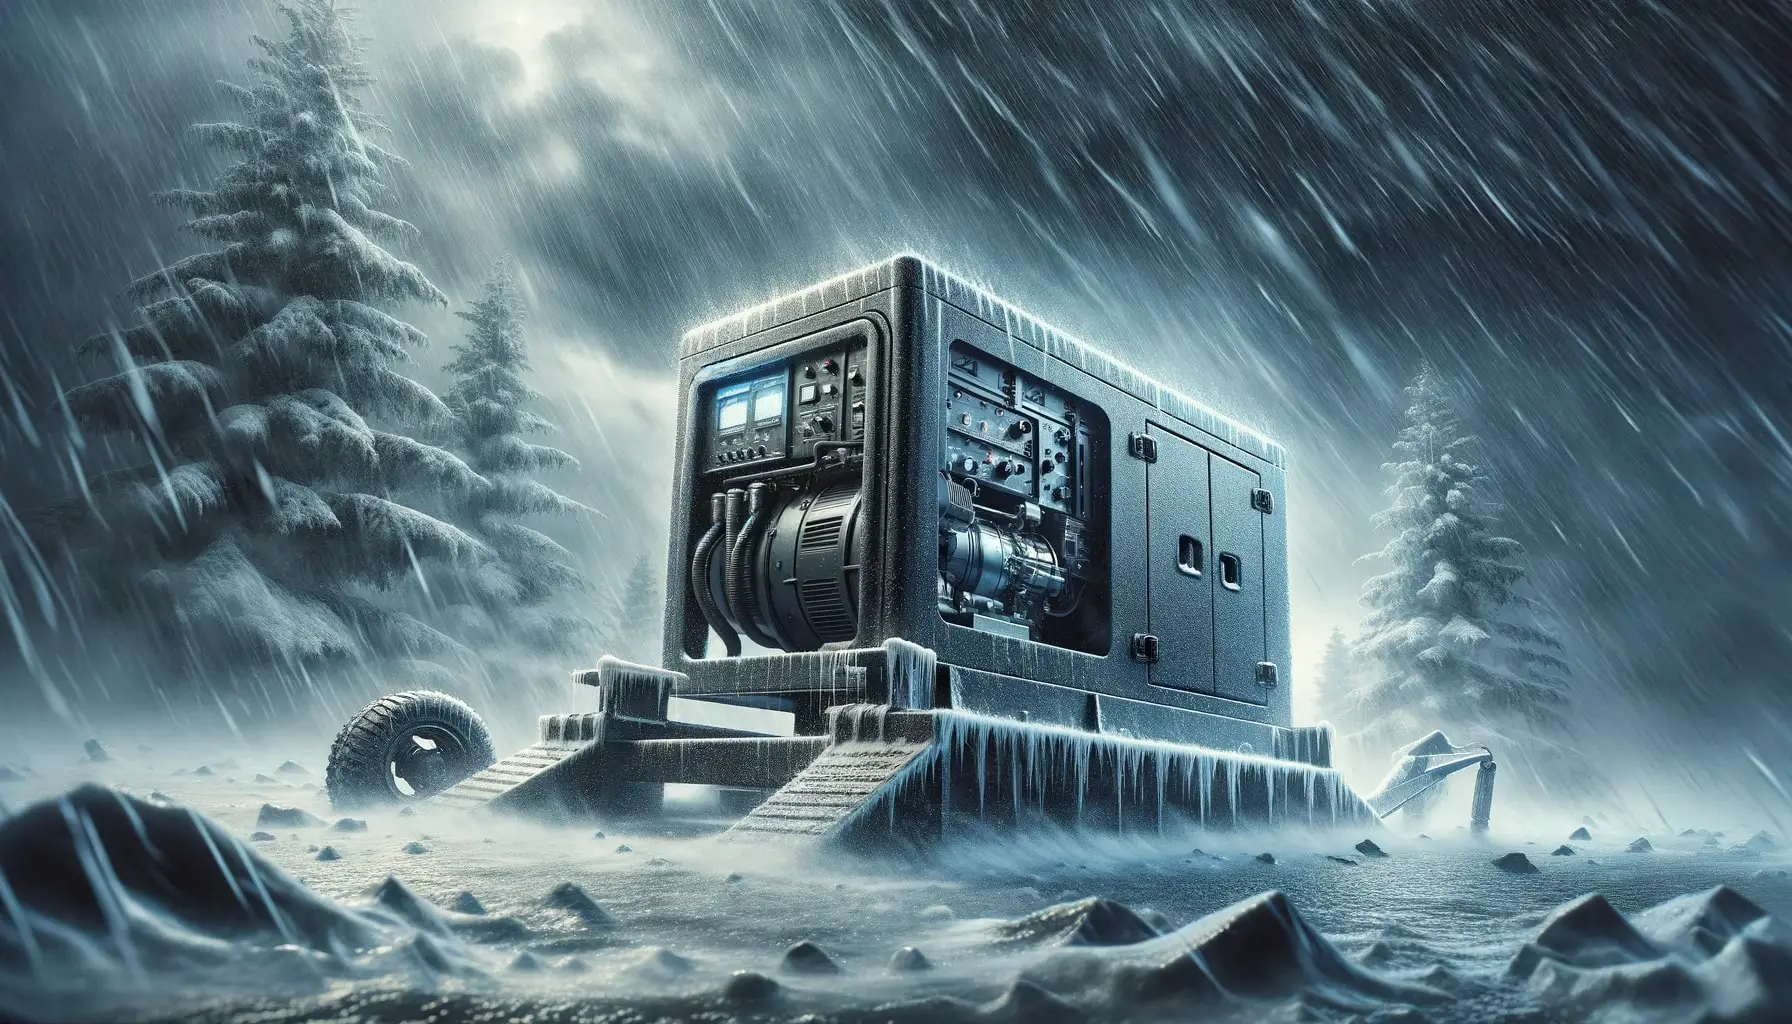 Can a generator be used during extreme weather conditions like a storm or heavy snow?